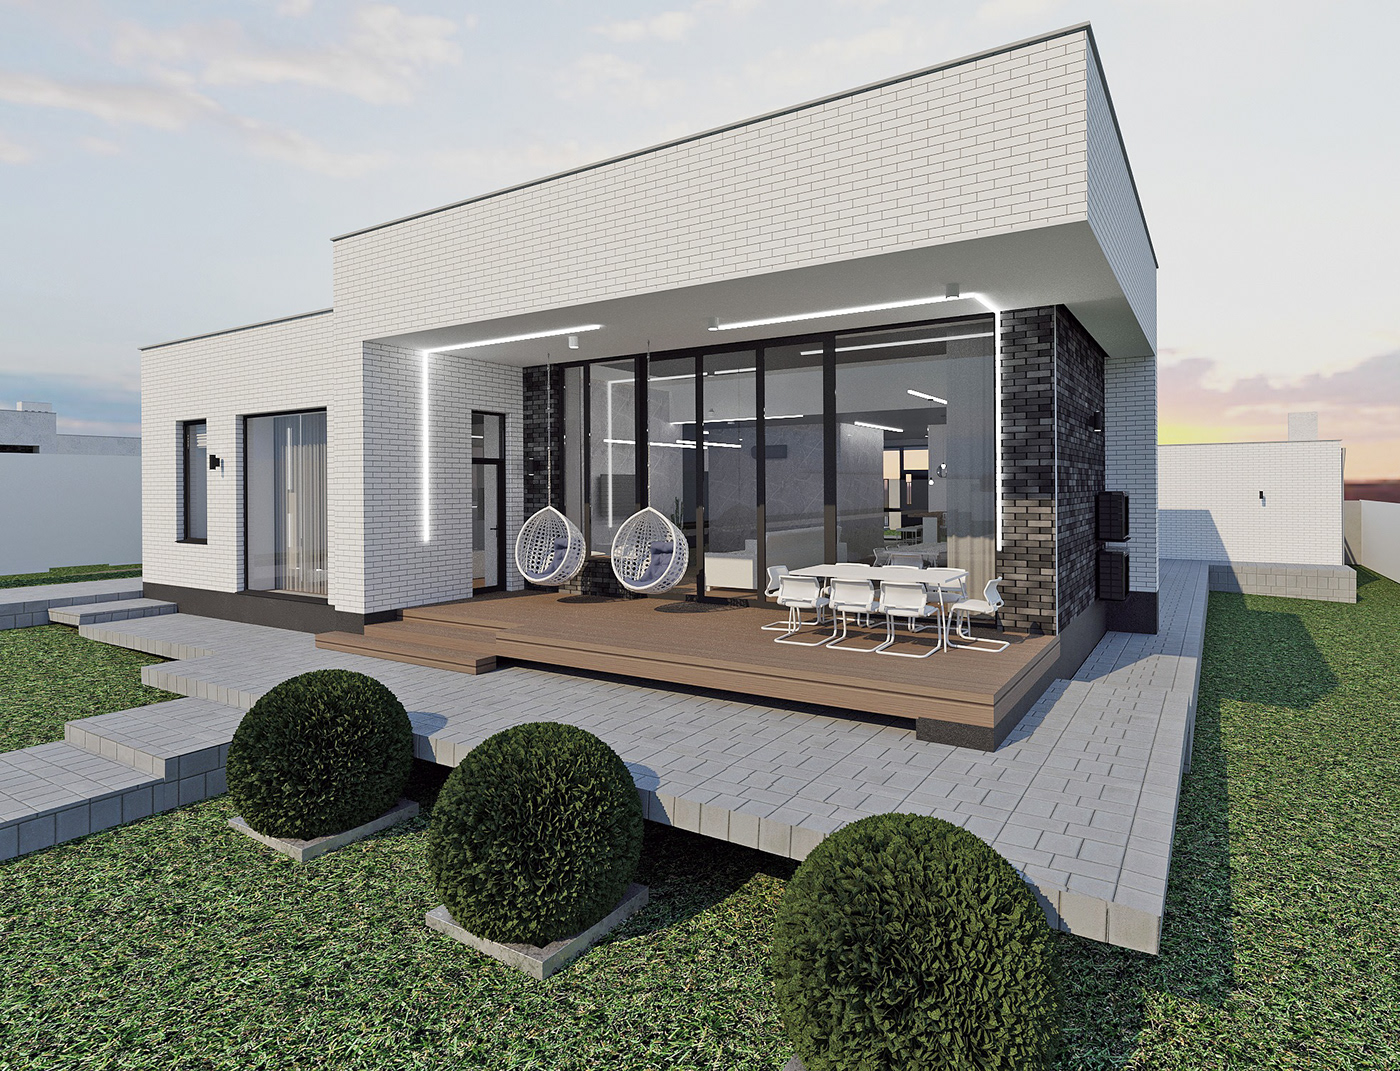 house exterior architecture Render visualization modern 3ds max corona